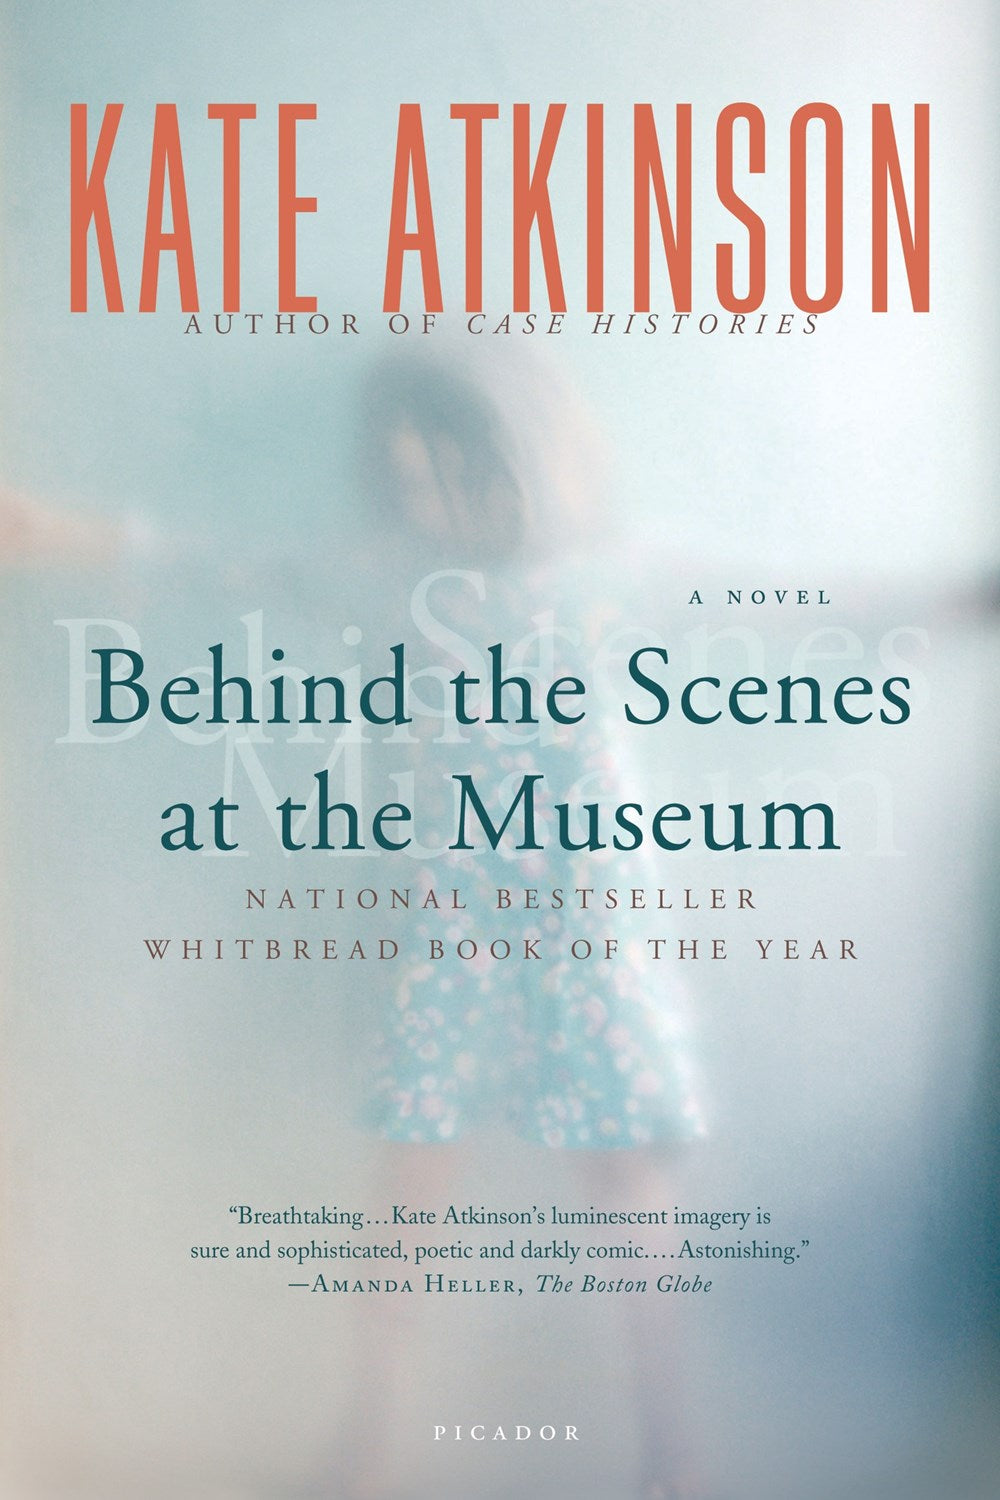 Behind the Scenes at the Museum: A Novel by Kate Atkinson (Twenty-Fifth Anniversary Edition)